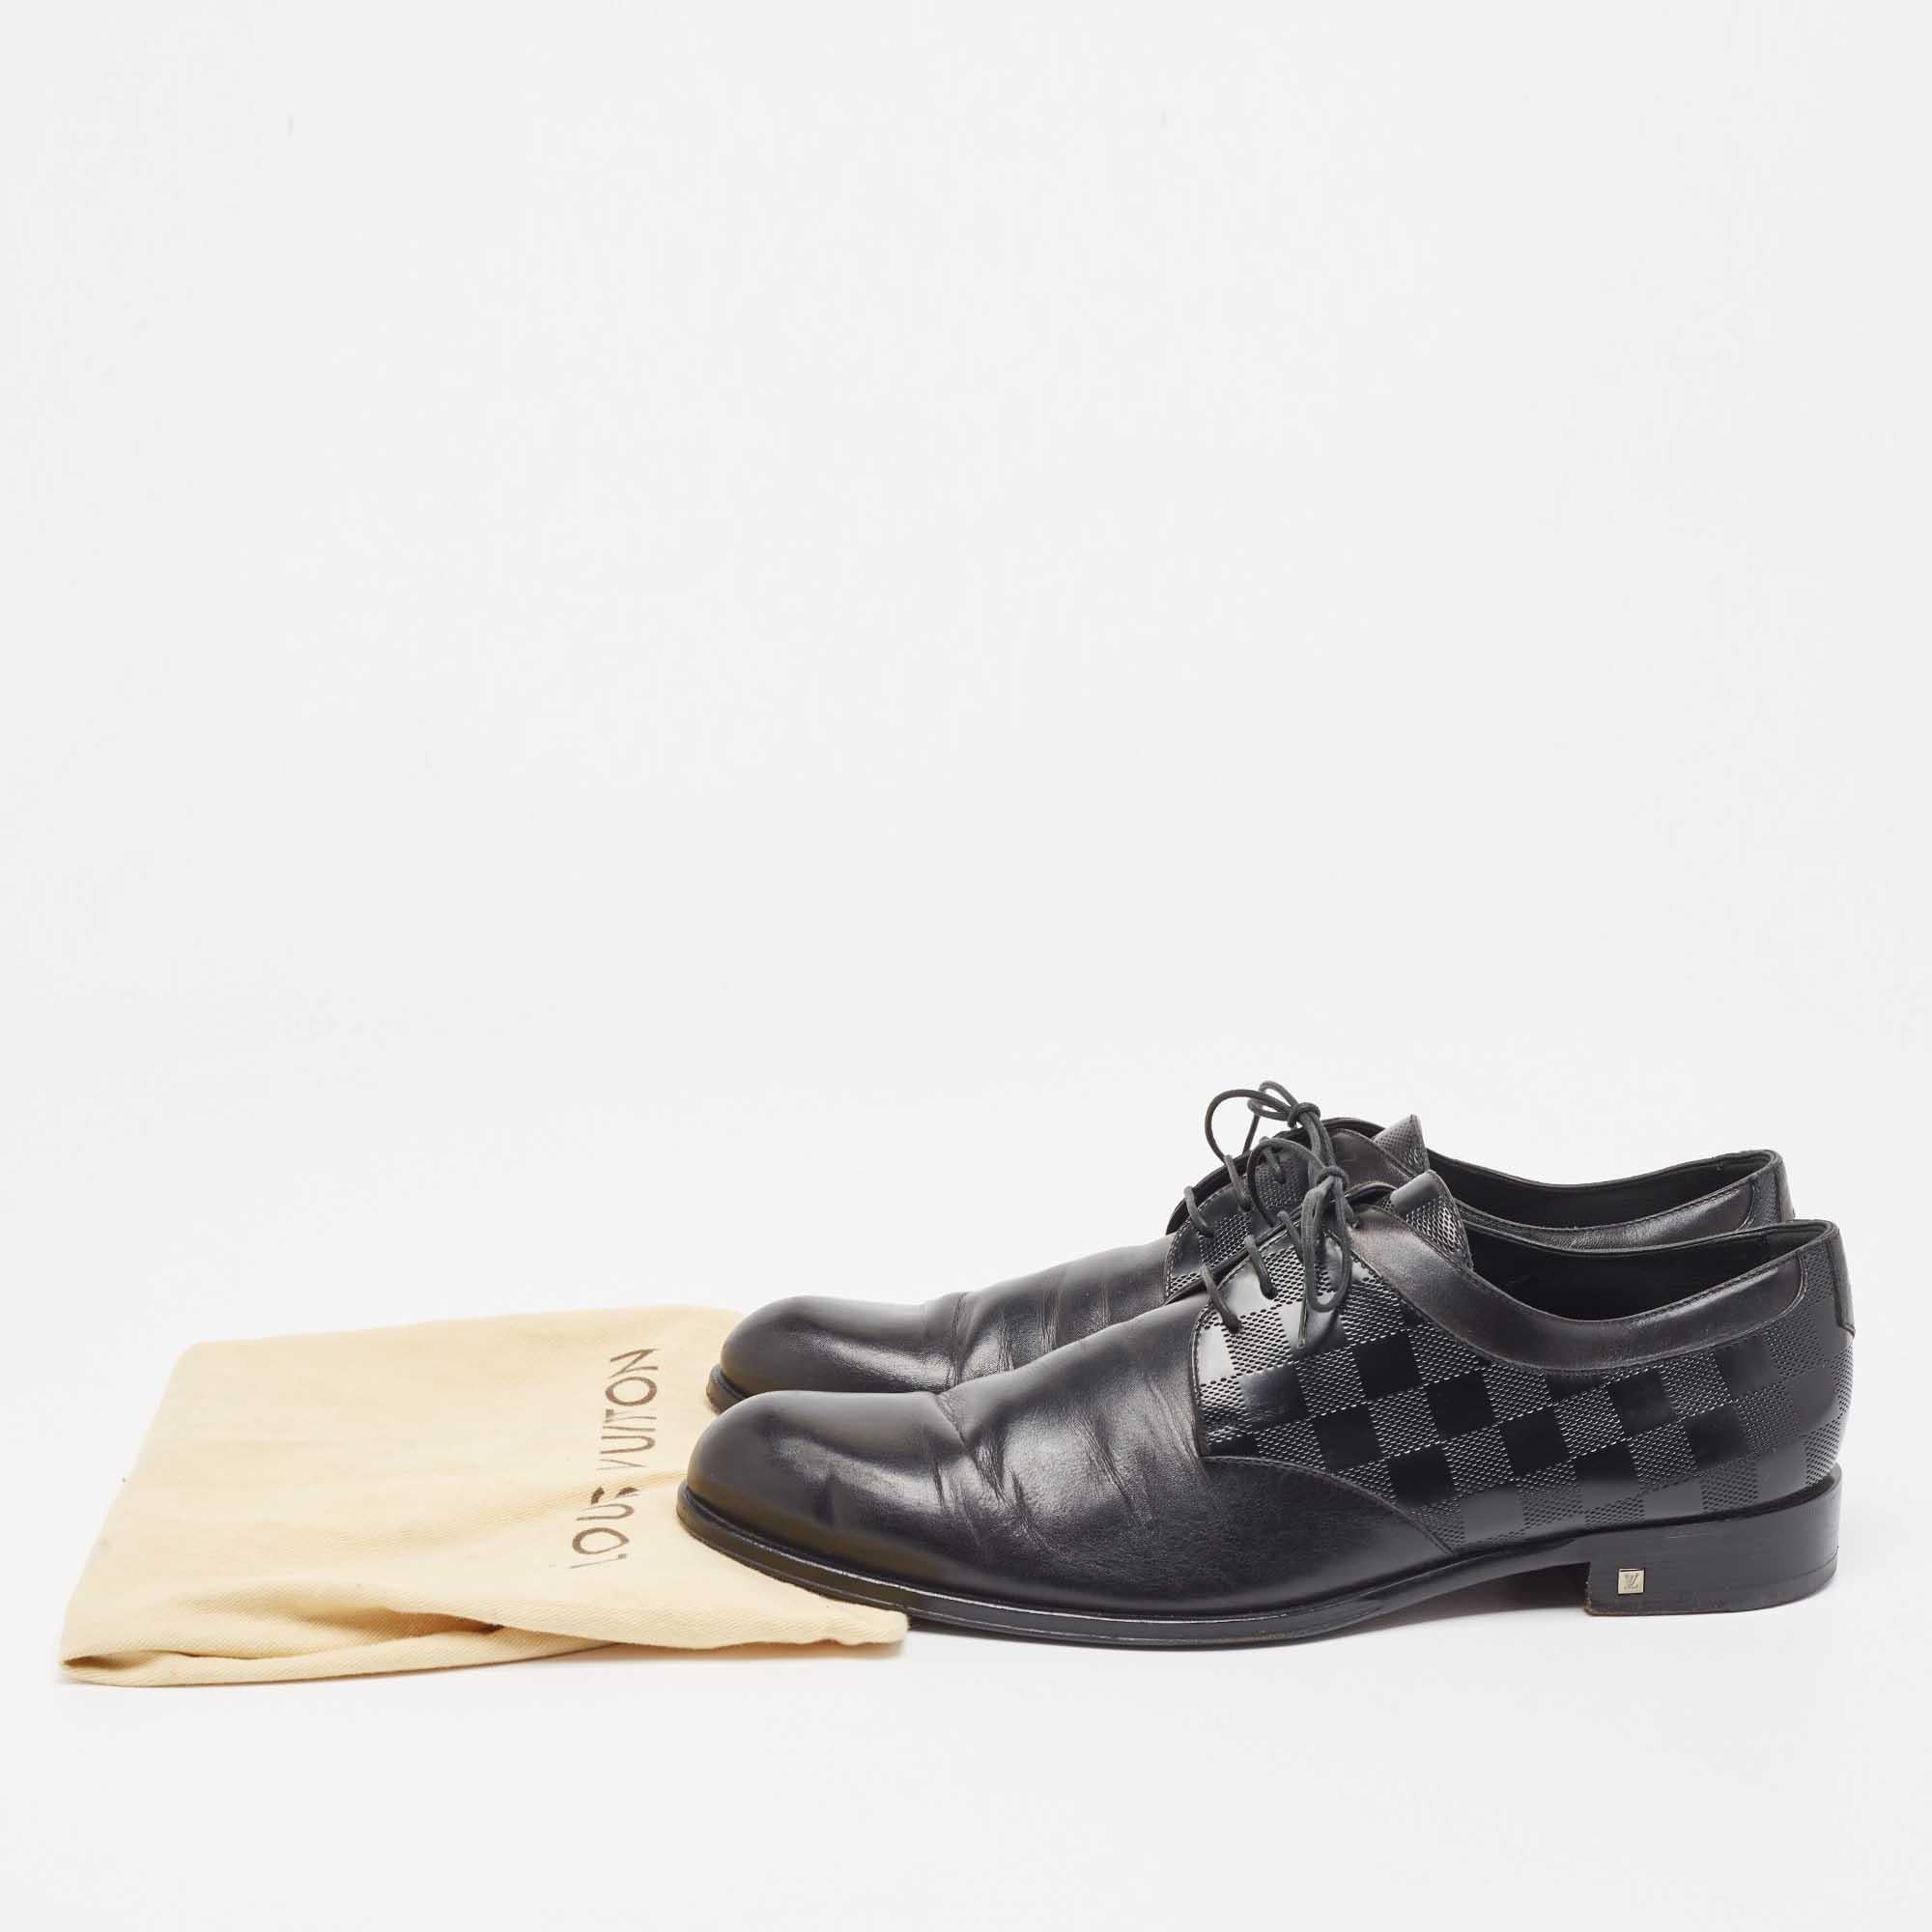 Louis Vuitton Black Damier Embossed Leather Lace Up Oxford Size 43 For Sale 5